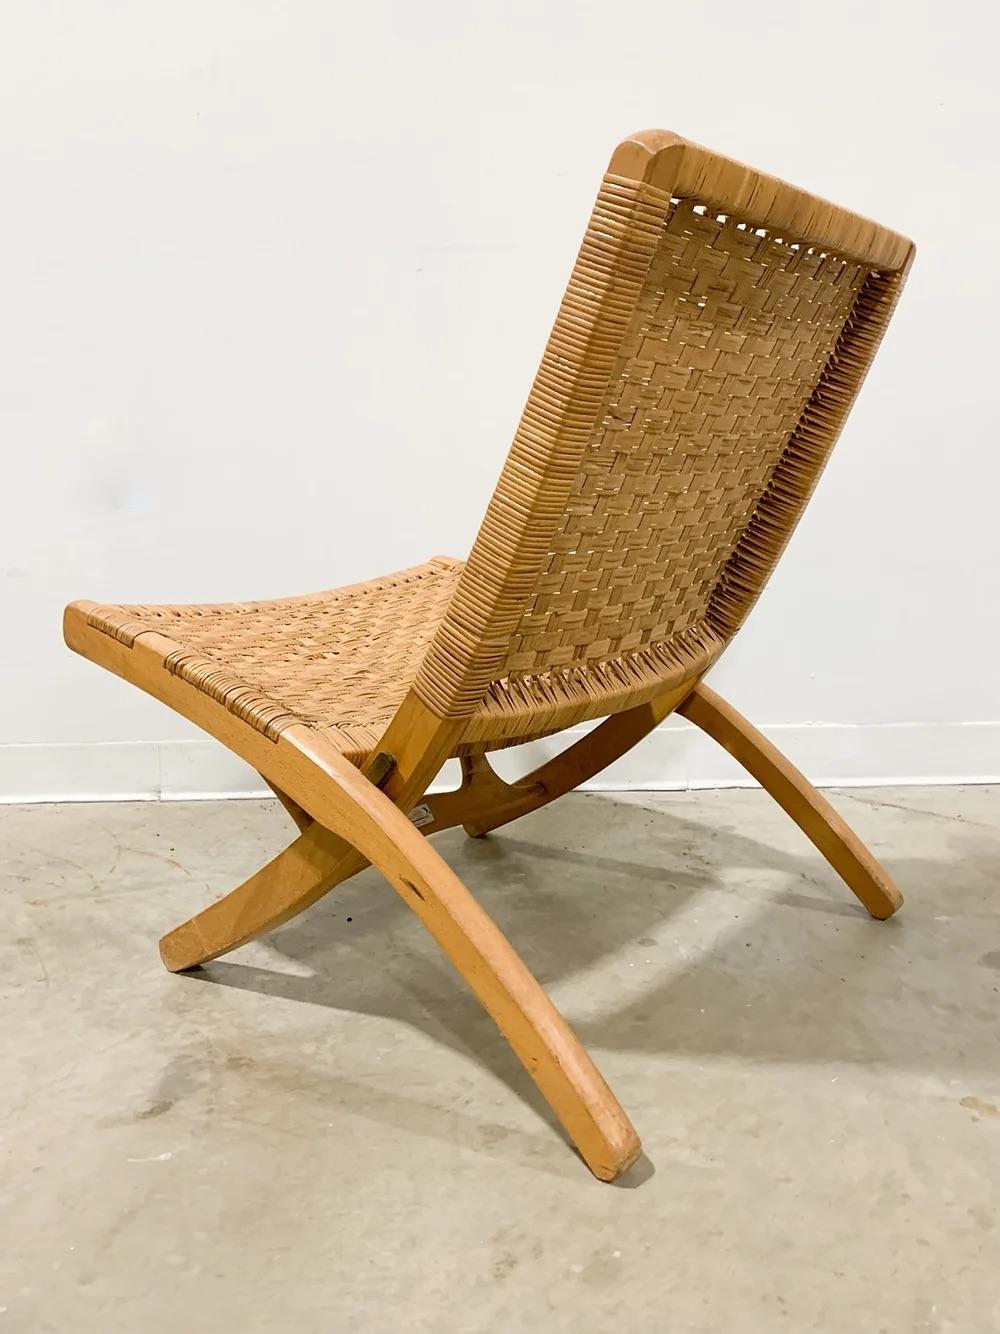 Rare folding lounge chair with cane seat and back made by Kosuga of Japan. High-quality build and beautiful woven cane combine for an exercise in sublime minimalism. Folds up easily for storage or to be hung on the wall. This chair is in very good